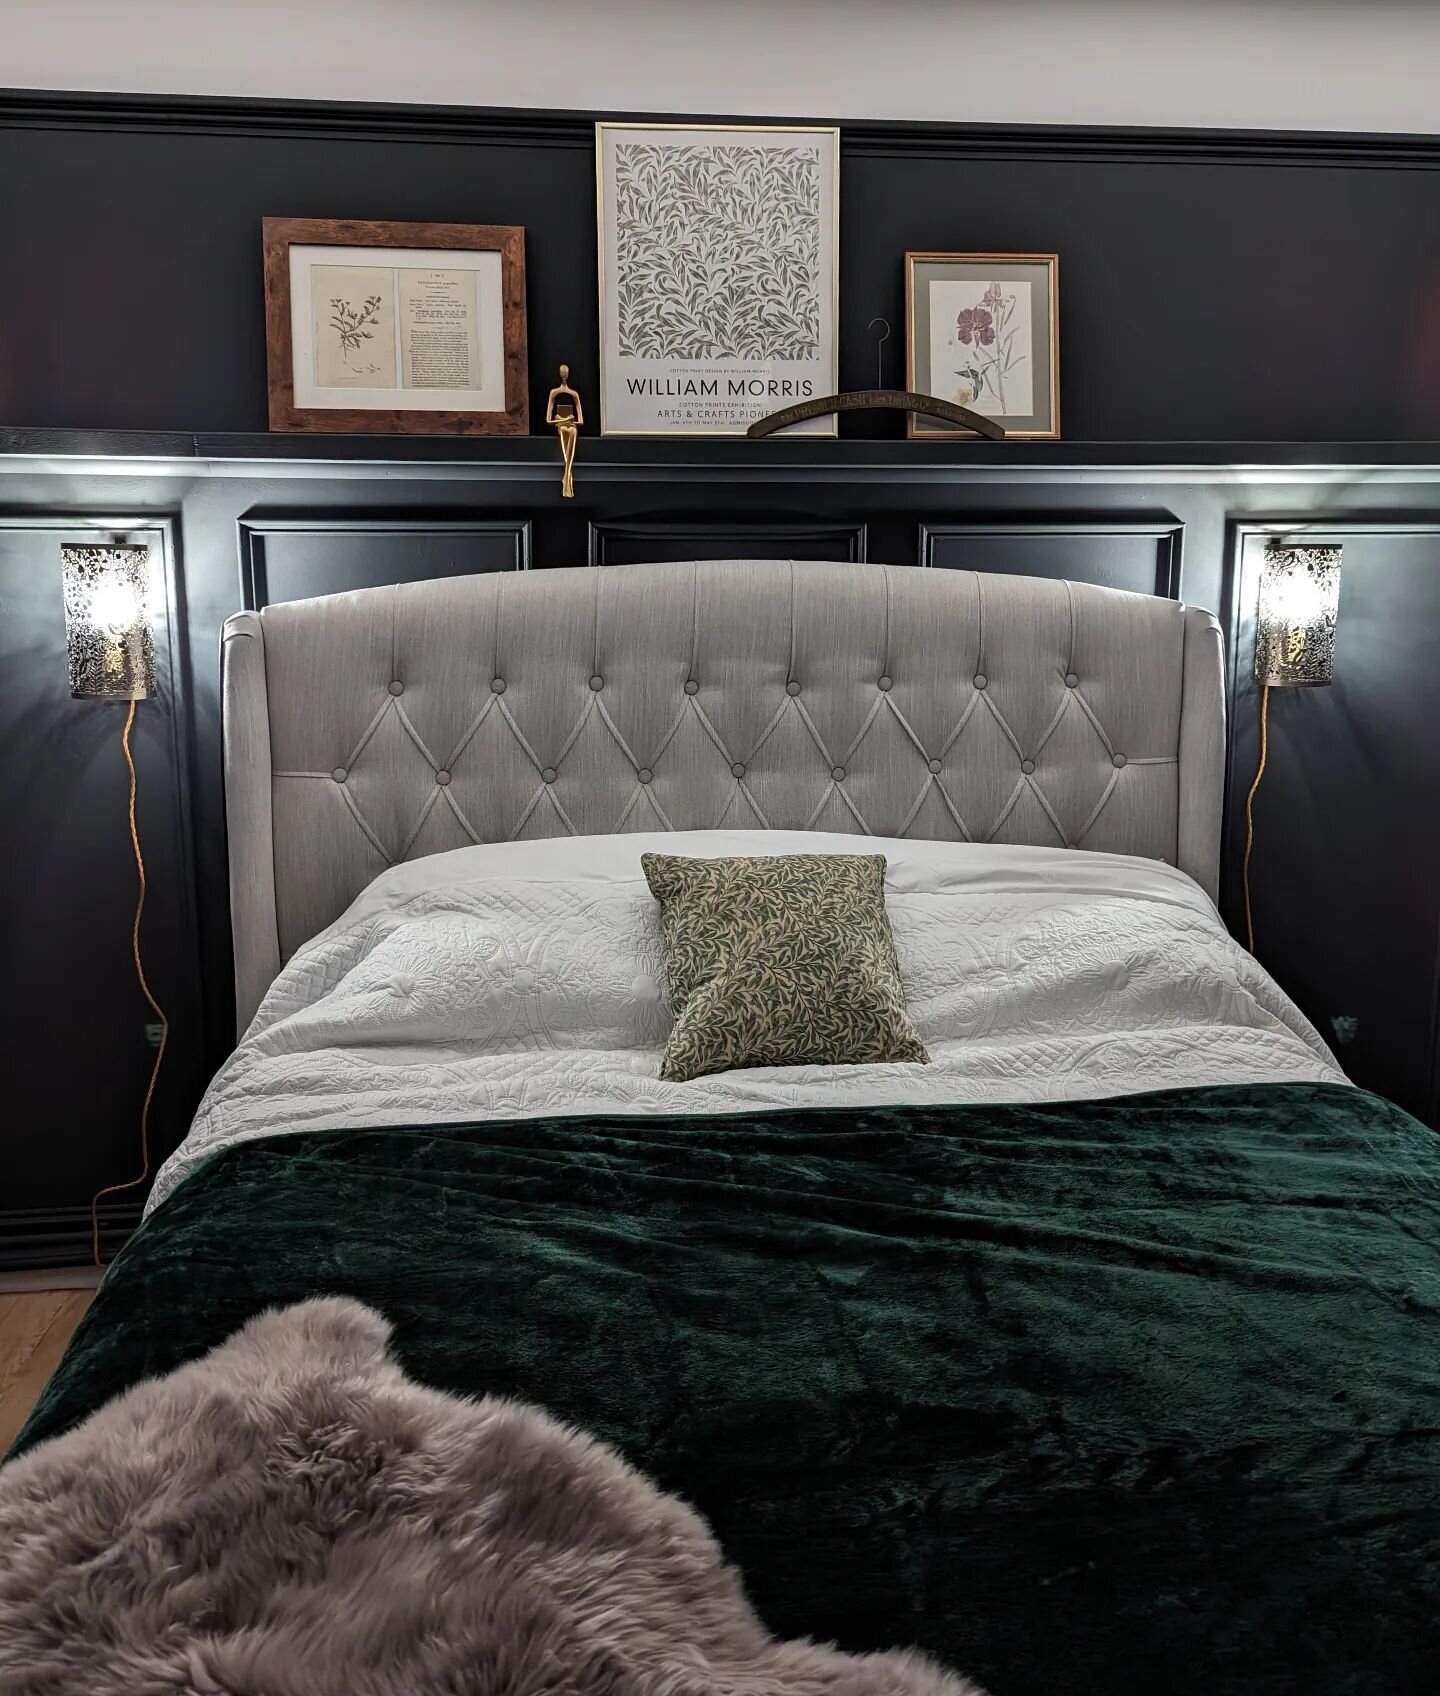 So we've been so caught up in house stuff, I've really let posting on here slip! So here's a glimpse into what we've been up to. Our new bedroom makeover. @proudysprojects did a great job as always, putting my &quot;just do this it'll be easy&quot; i